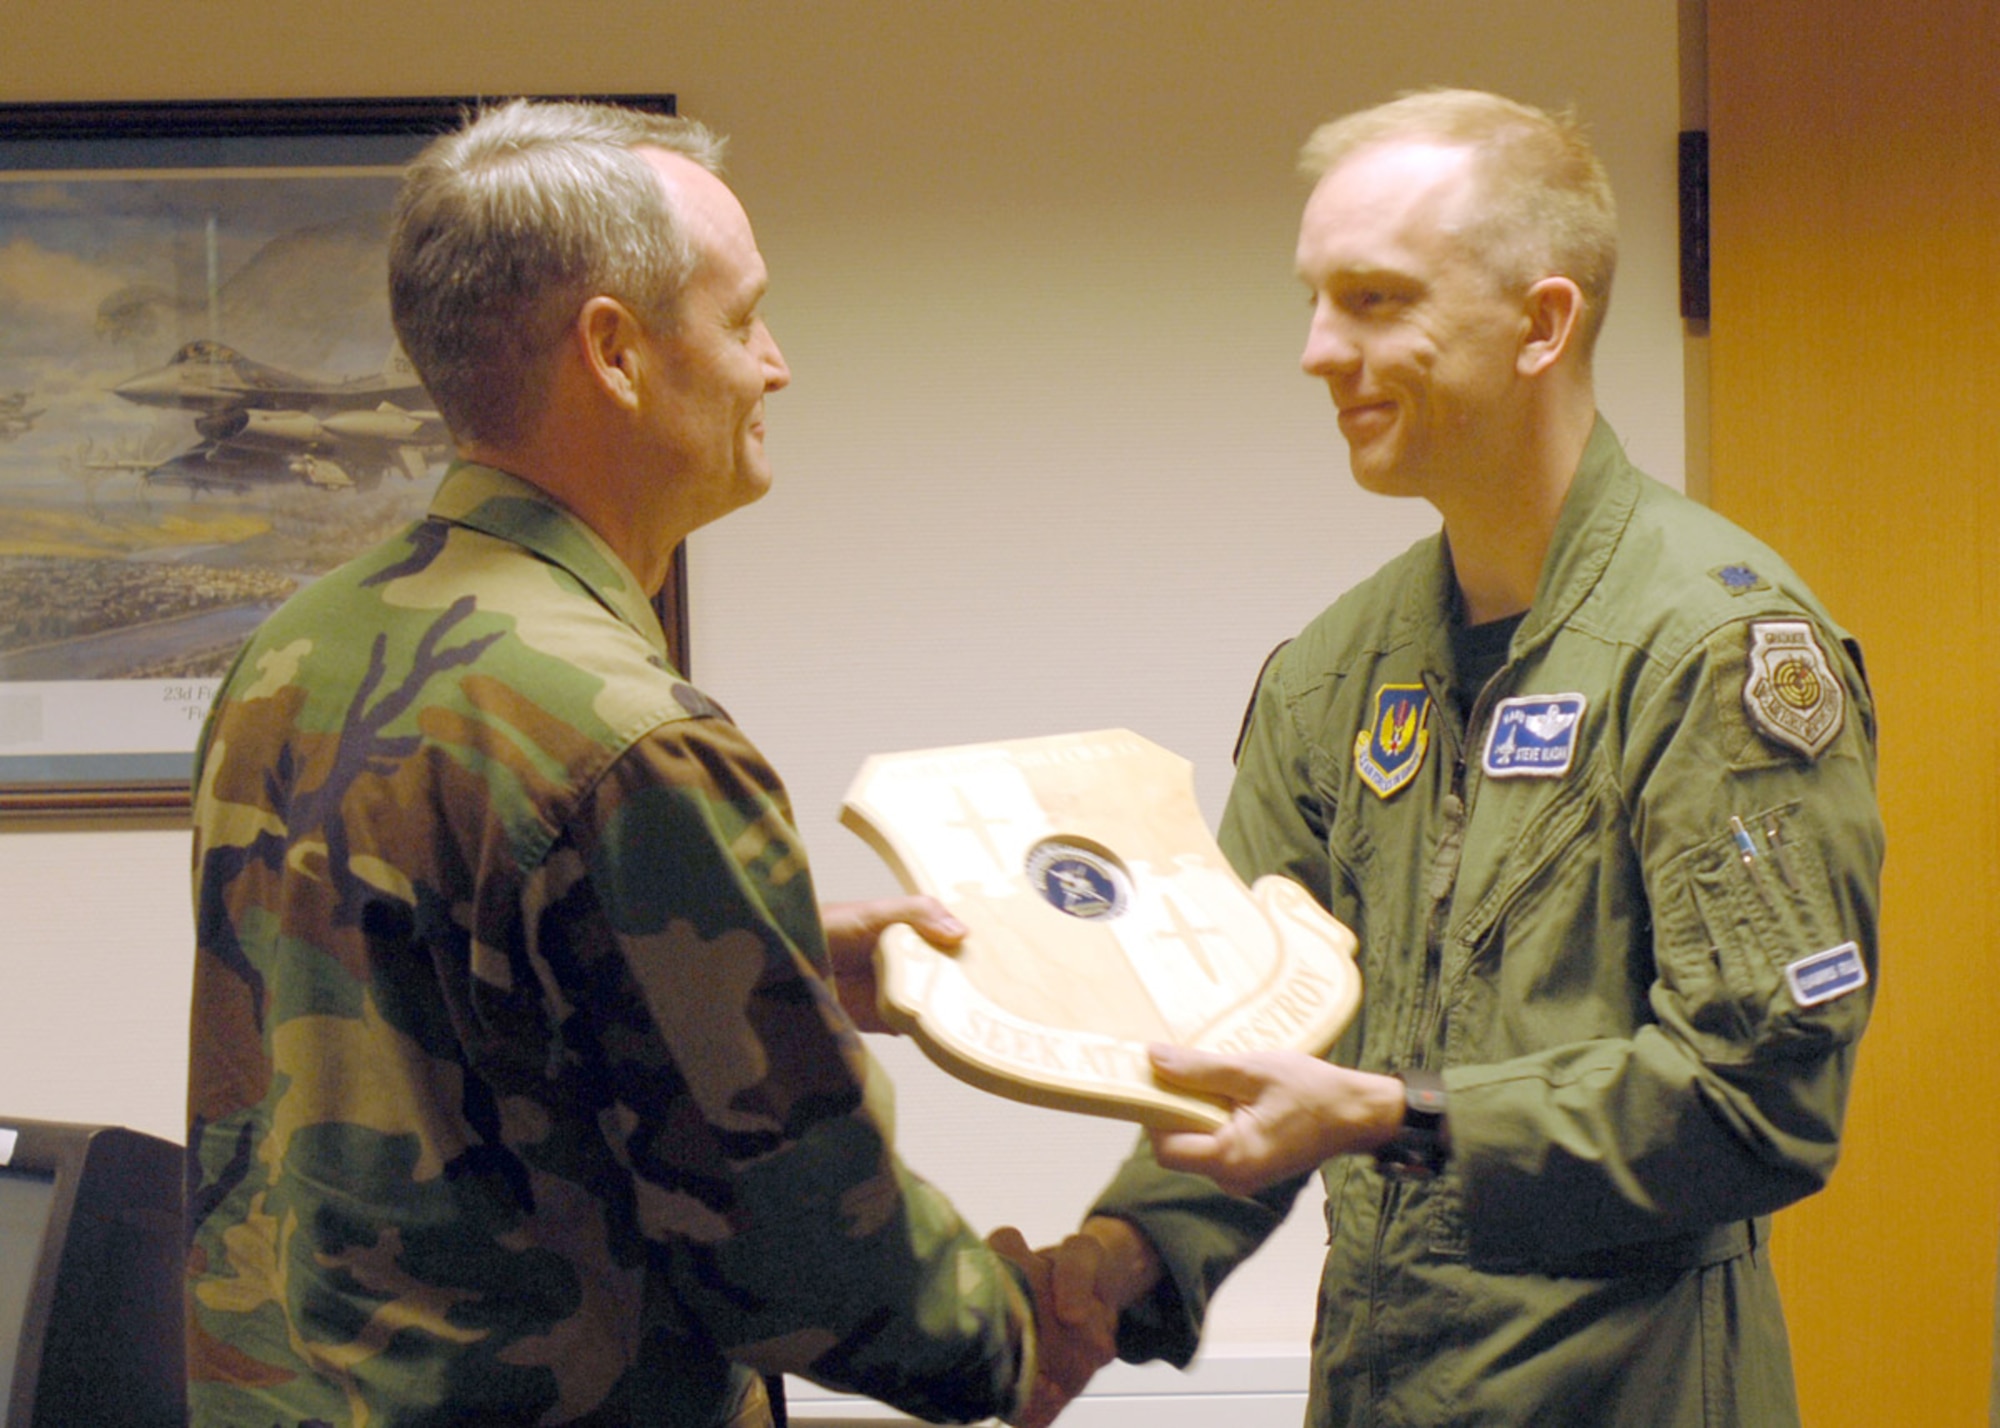 SPANGDAHLEM AIR BASE, Germany – Col. Darryl Roberson, 52nd Fighter Wing commander, presents a Responsible Choices plaque to Lt. Col. Steven Vlasak, 23rd Fighter Squadron commander, at the 52nd Operations Group office Aug. 29. (U.S. Air Force photo/Senior Airman Josie Kemp)